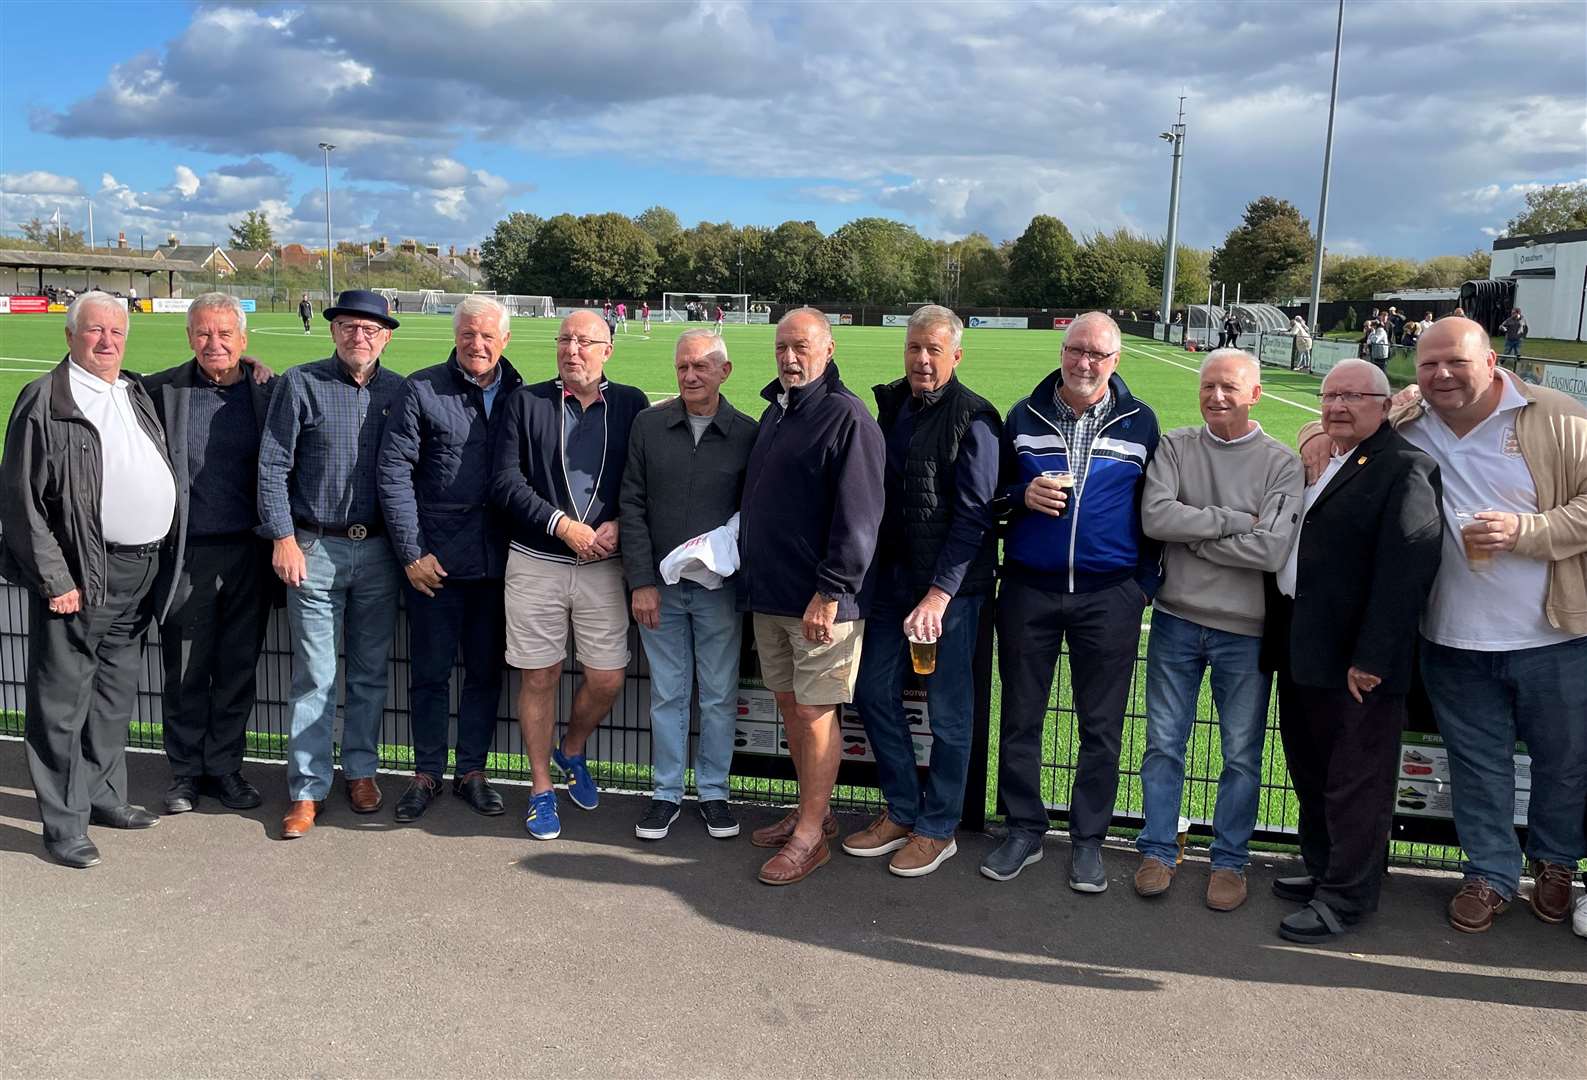 Dave Bright meets up with former Faversham FC team-mates